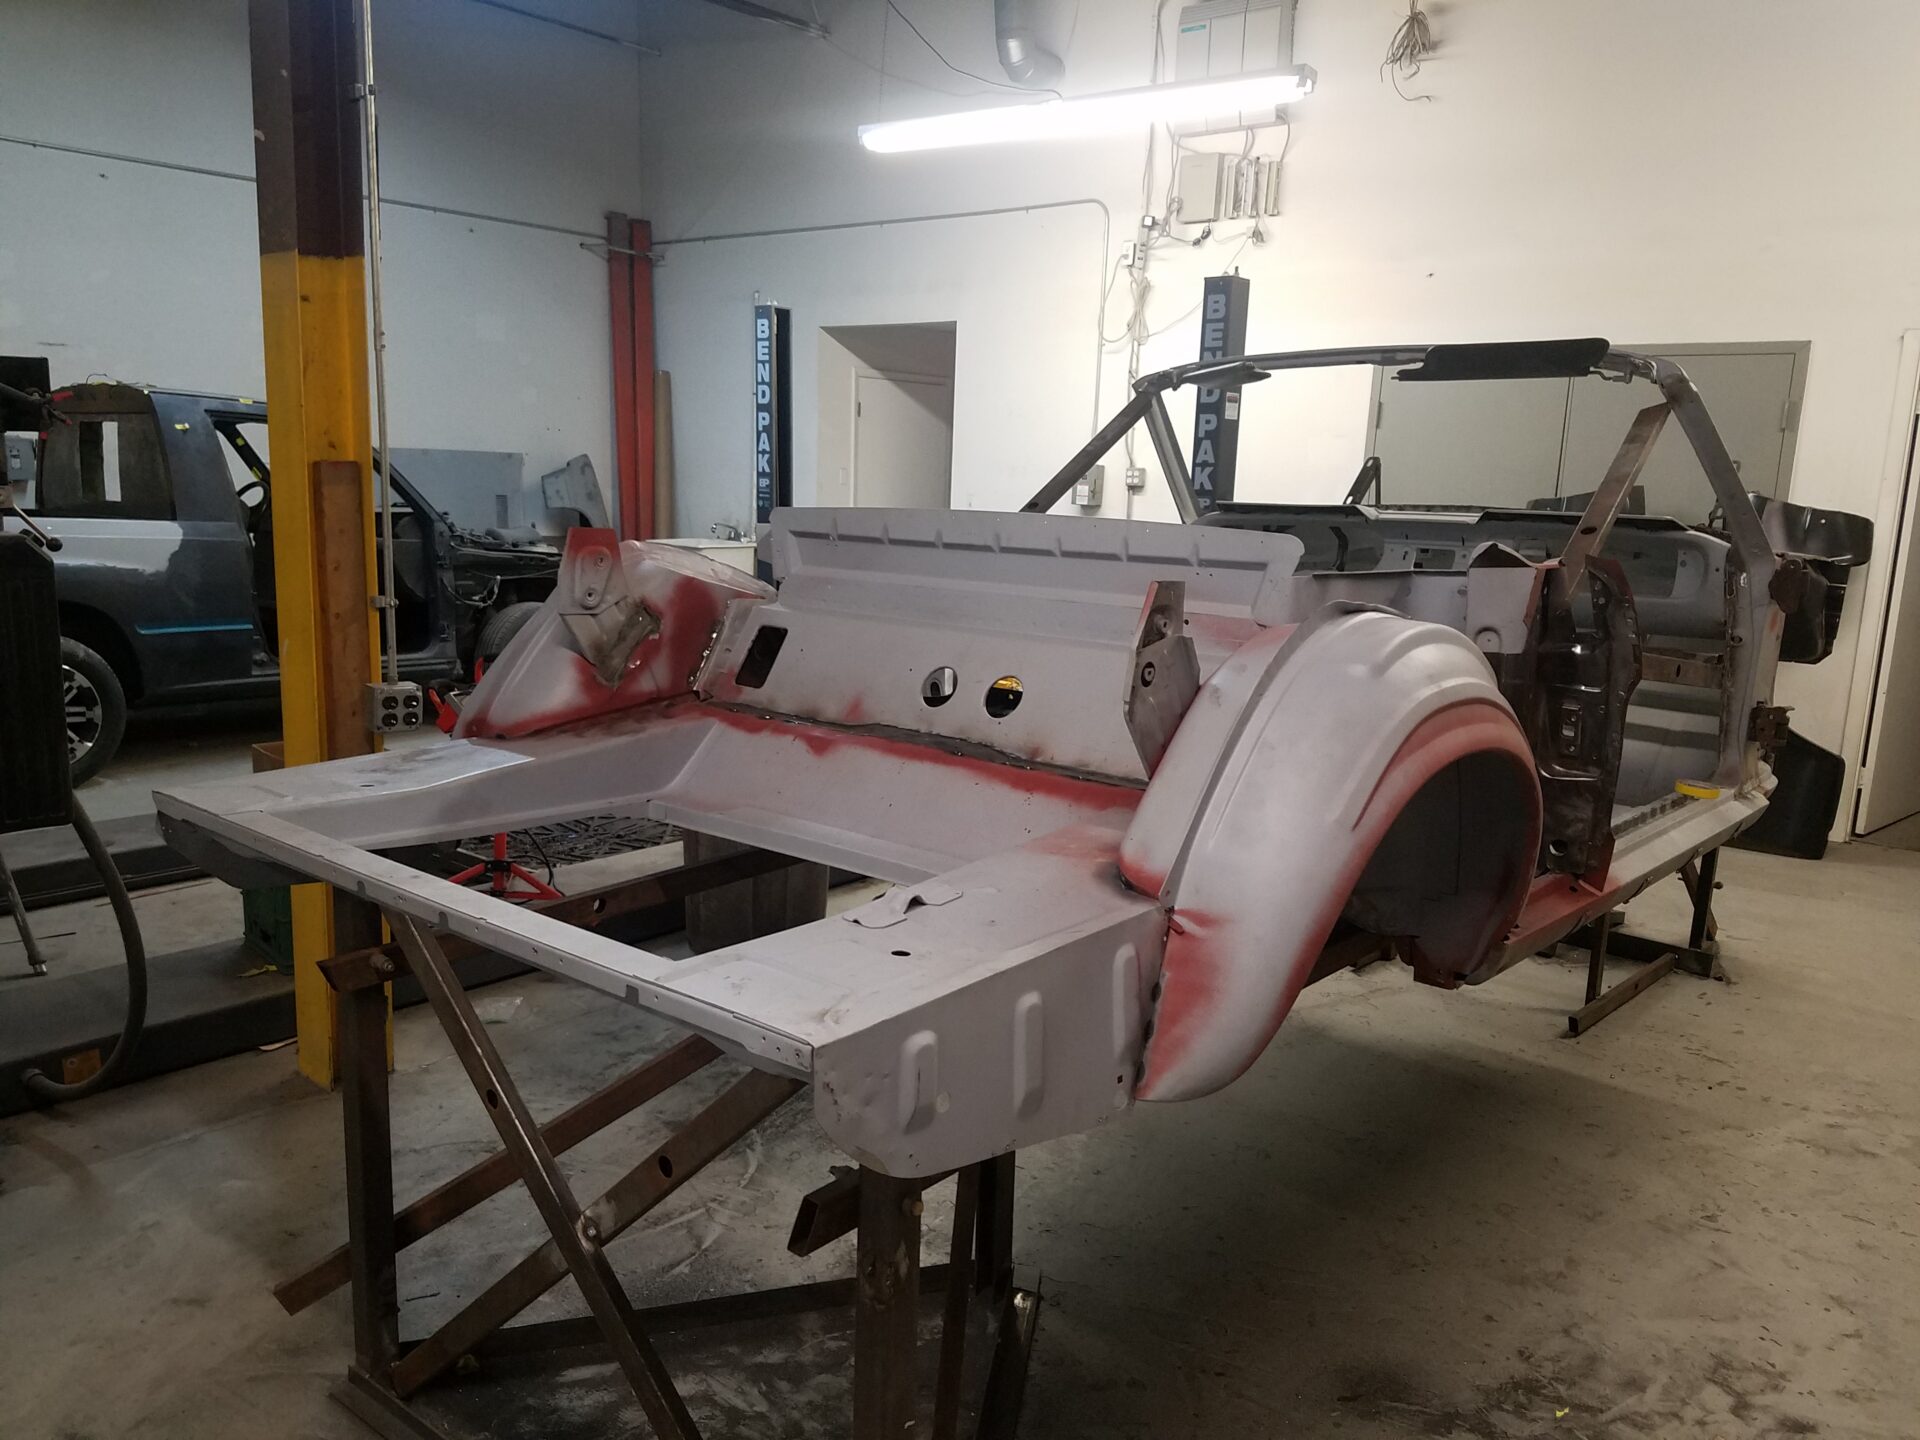 1966 Ford Mustang Convertible frames that need repairs